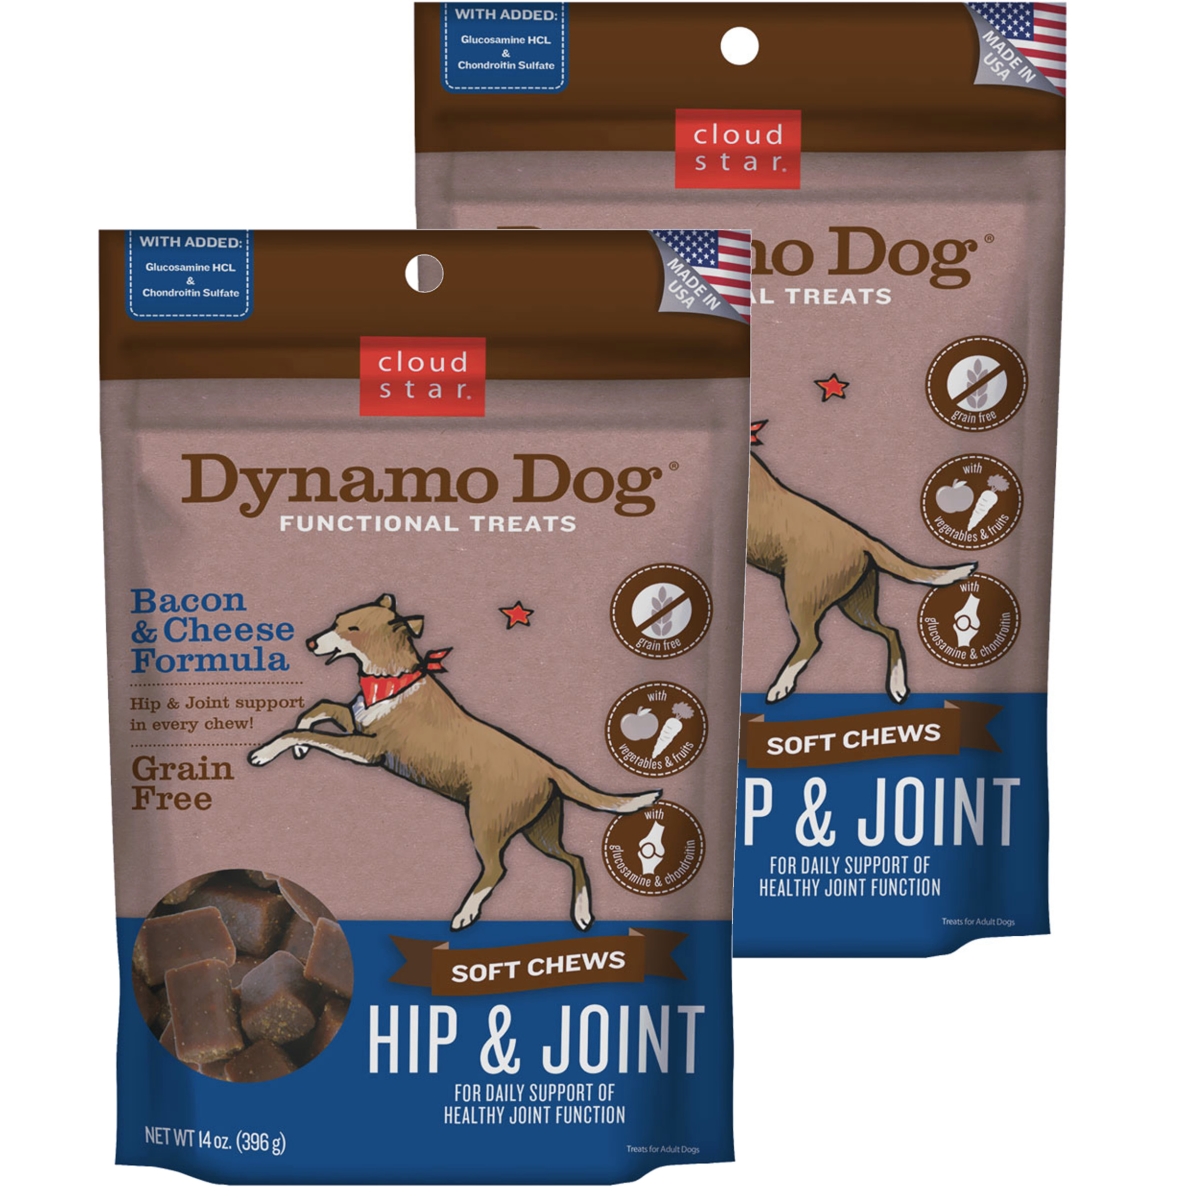 192959800296 14 Oz Dynamo Dog Hip & Joint Bacon & Cheese Functional Treats - Pack Of 2